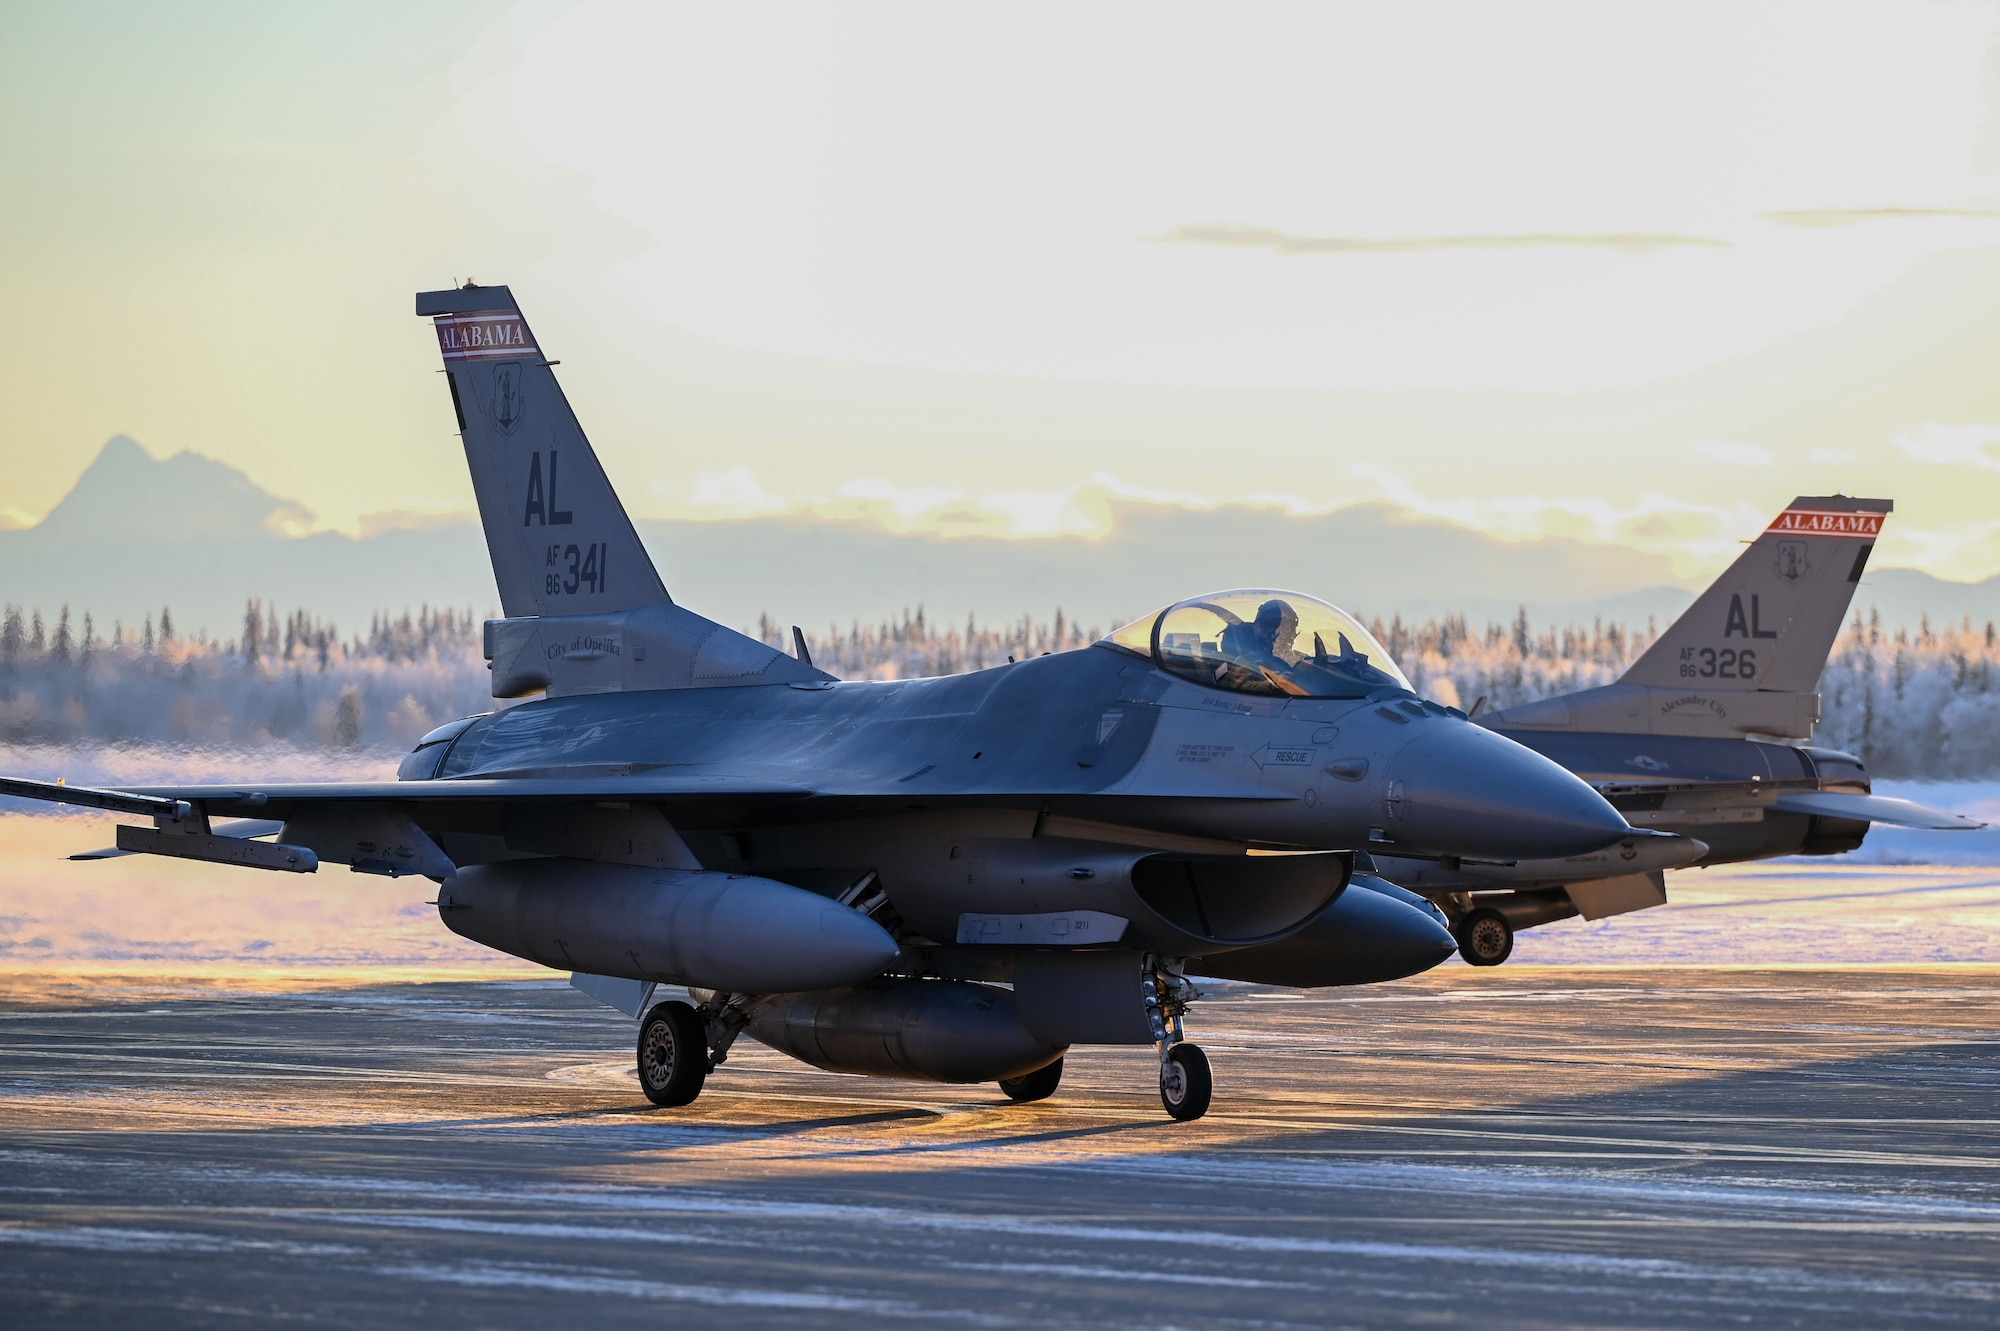 A U.S. Air Force F-16 Fighting Falcon from Dannelly Field, Air National Guard Base, taxis into a hangar at Eielson Air Force Base, Alaska, Jan. 12, 2023.